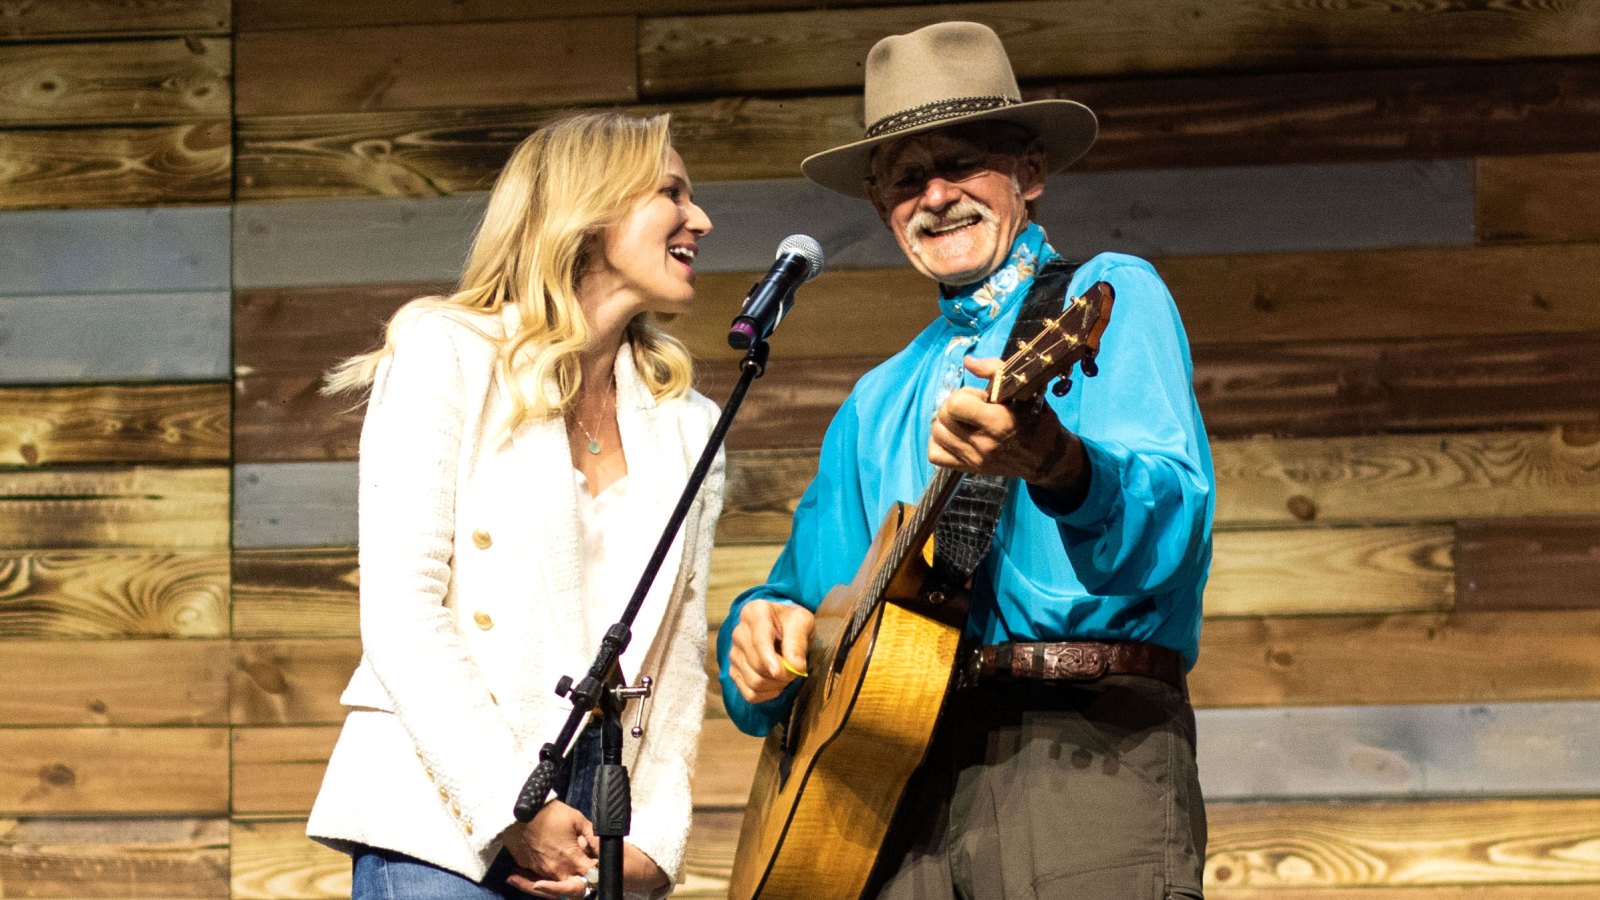 Inside the Denver Wellness Your Way Festival Jewel and her father, Atz Kilcher, performing together on the Johnson & Johnson main stage